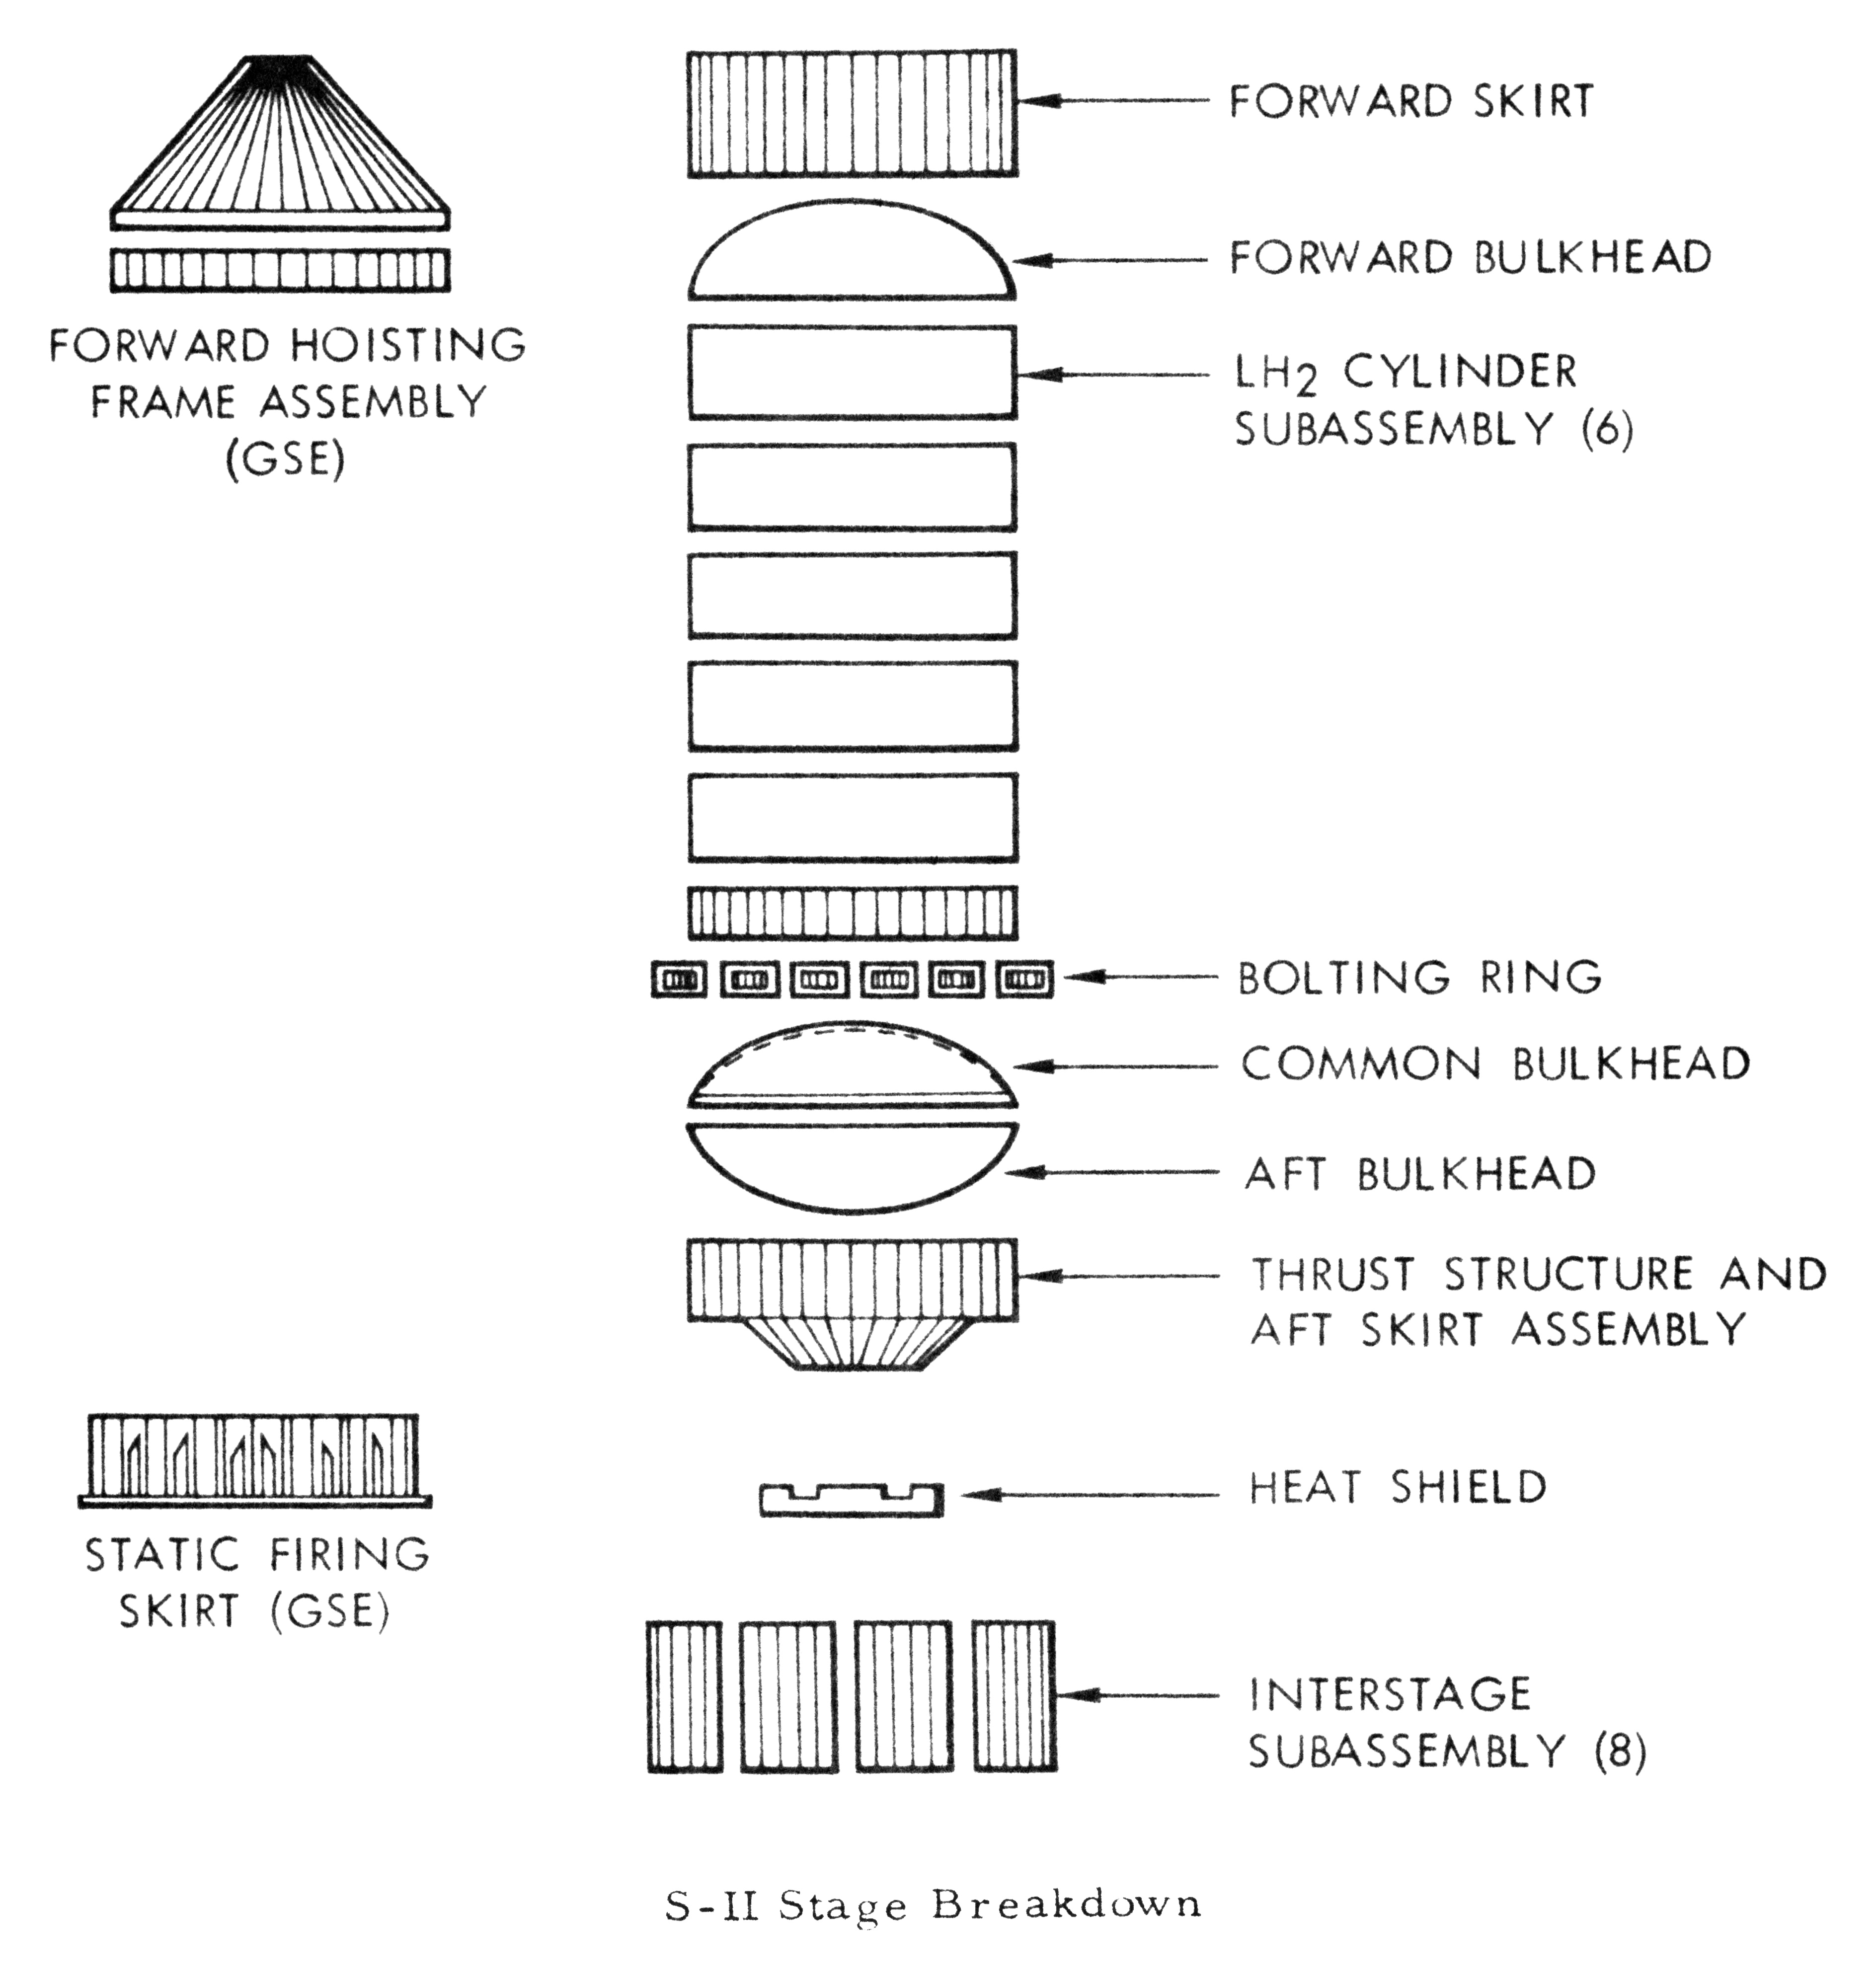 The Common Bulkhead for the Saturn S-II Vehicle